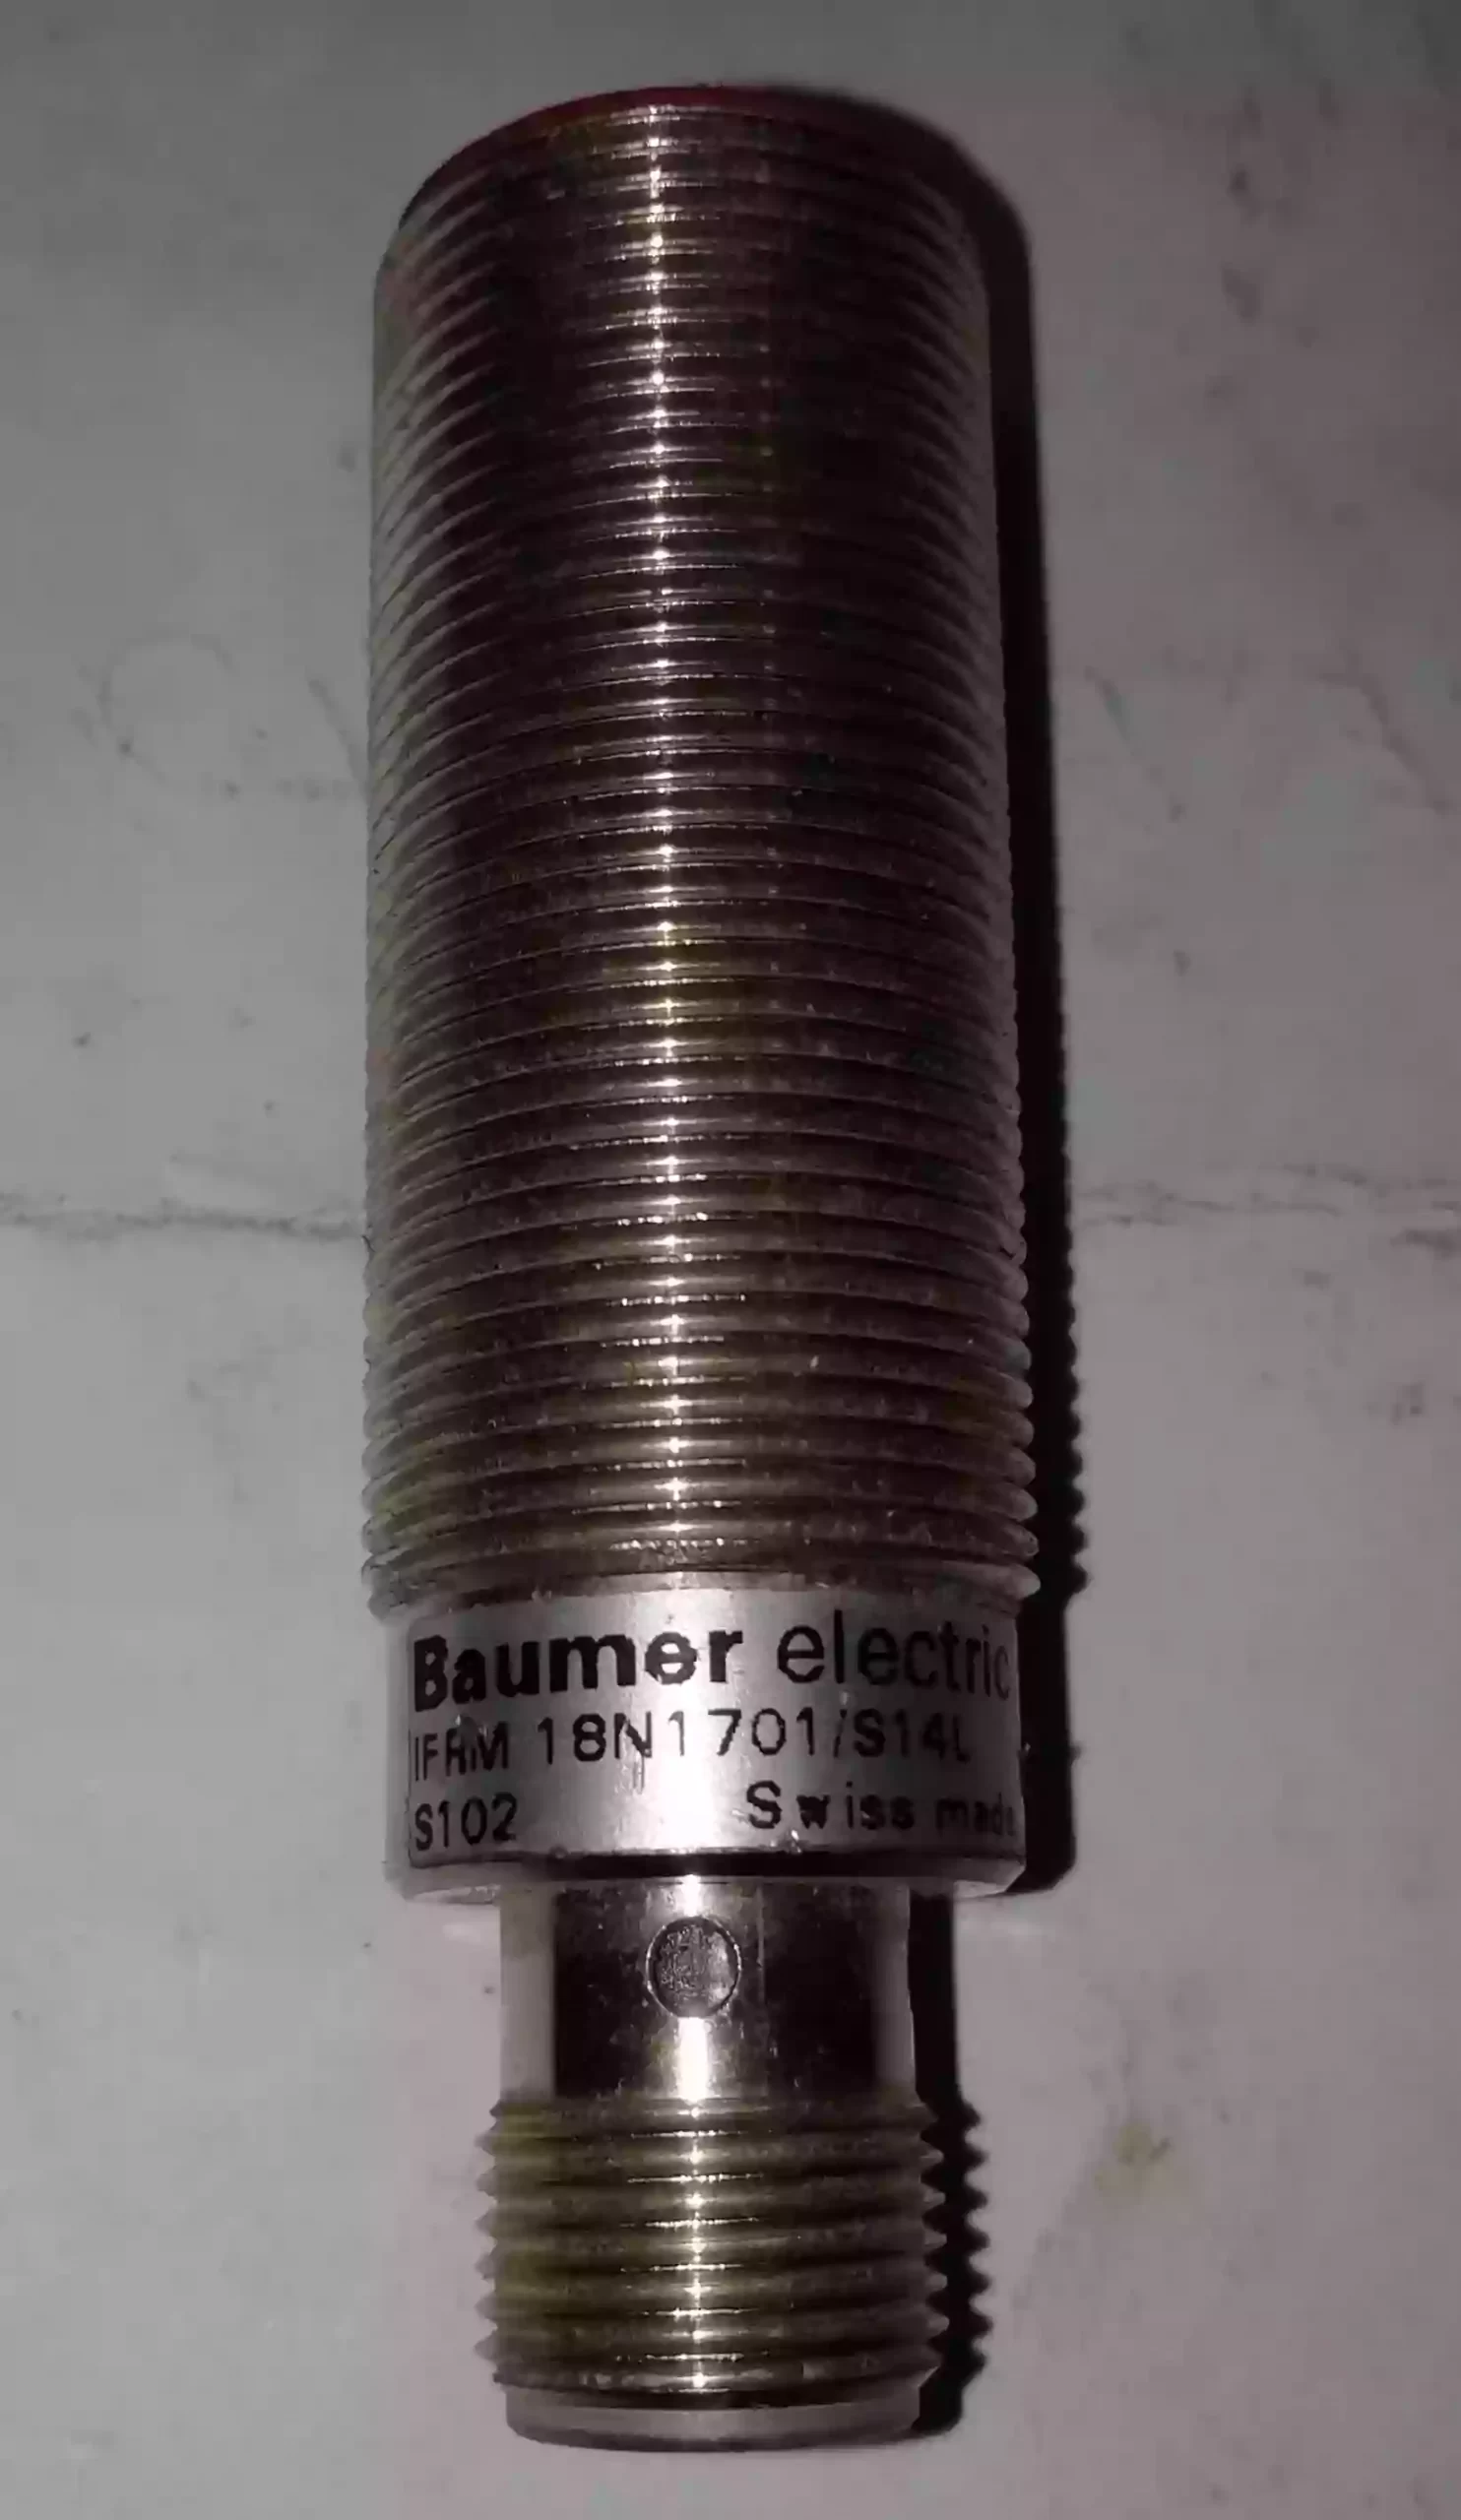 Baumer IFRM 18N1701/S14L Inductive proximity switch sensor, Pride Bangladesh offers marine and industrial sensors